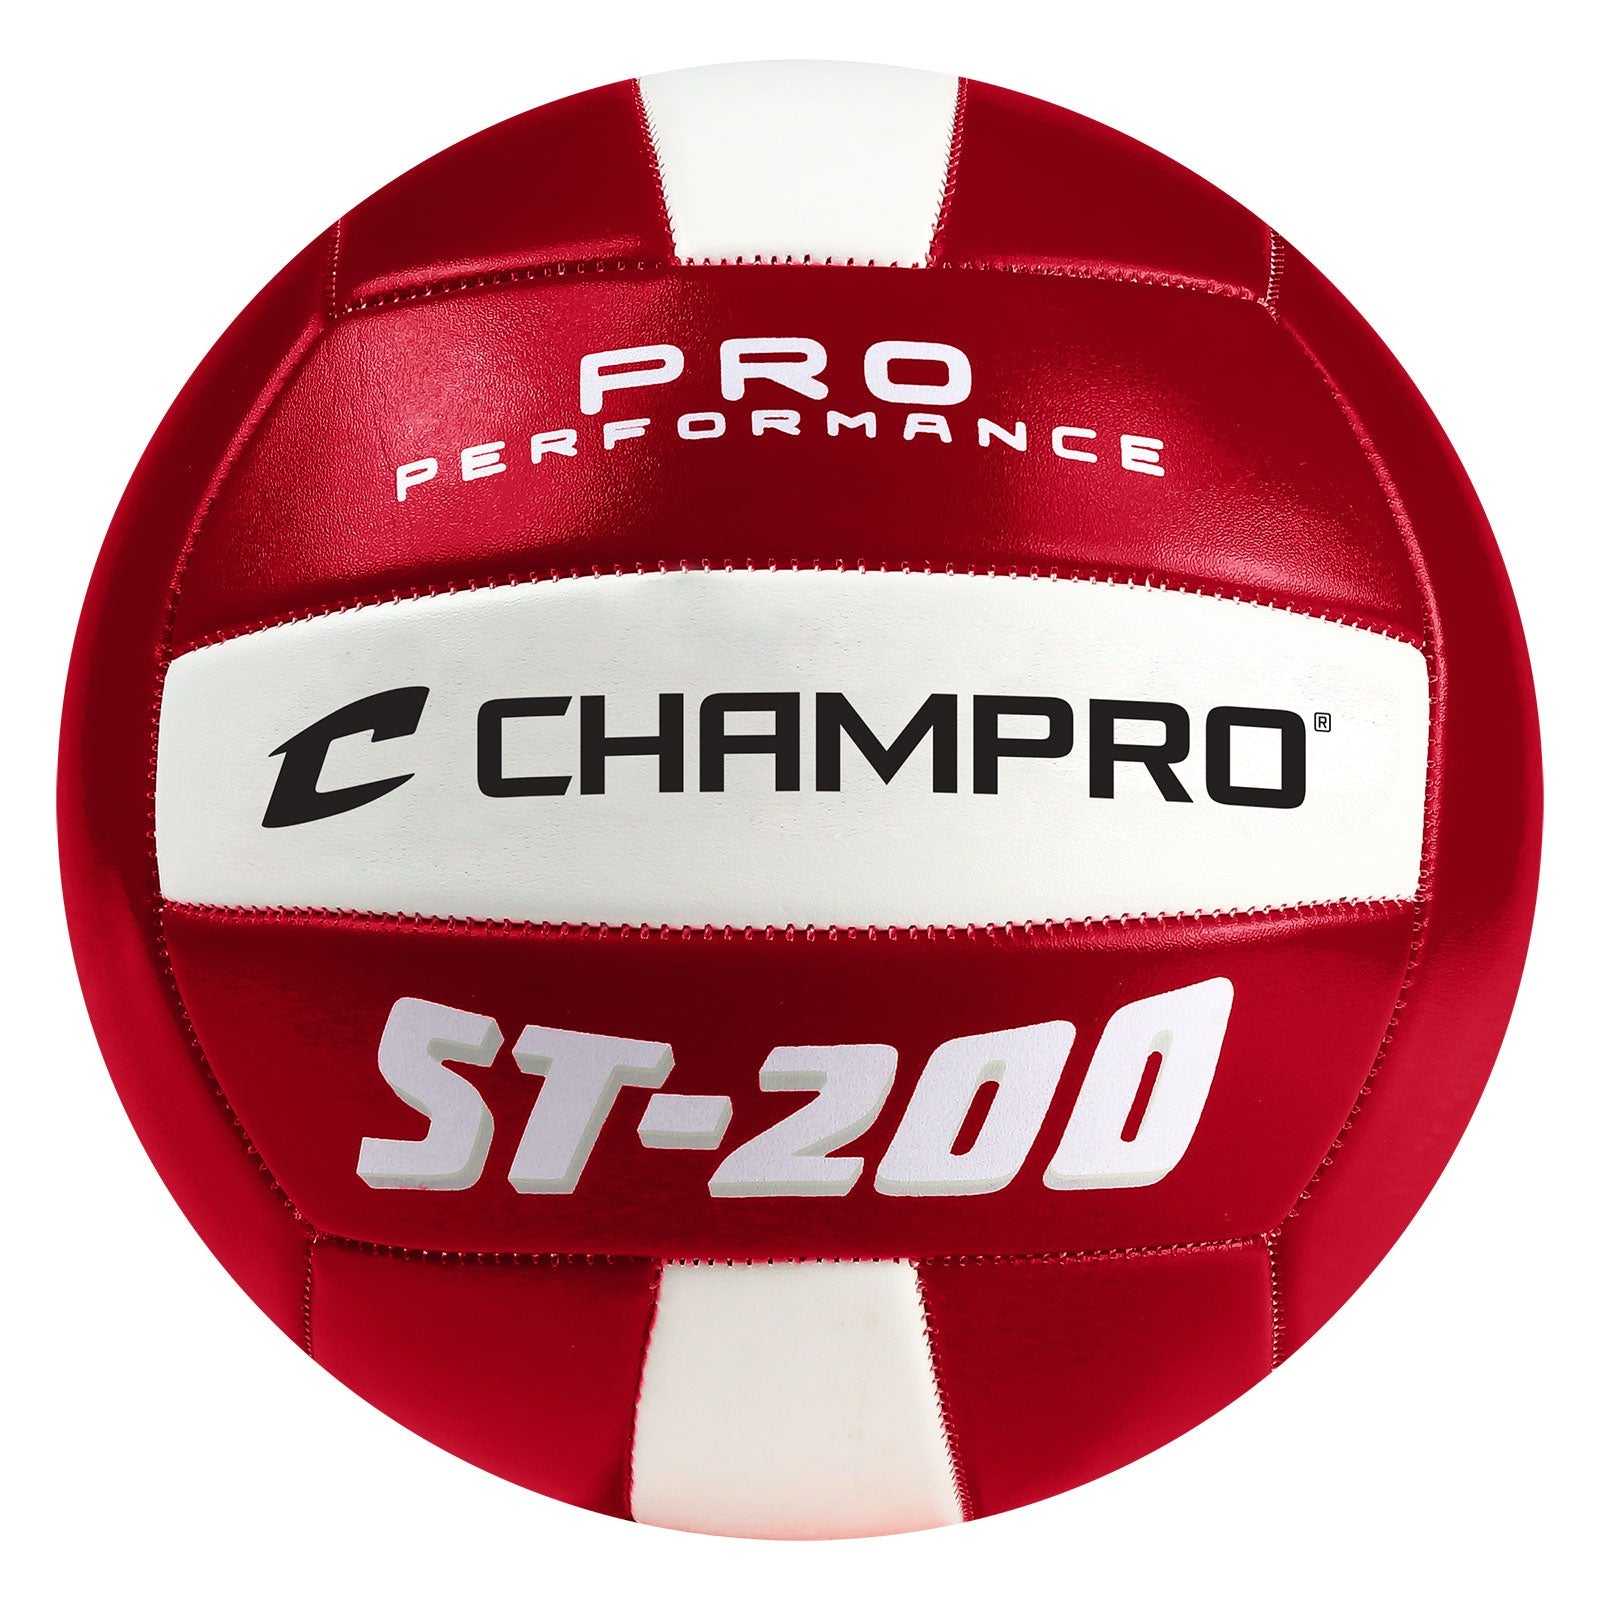 Champro VB-ST200 St200 Pro Perforamnce Volleyball - Scarlet - HIT a Double